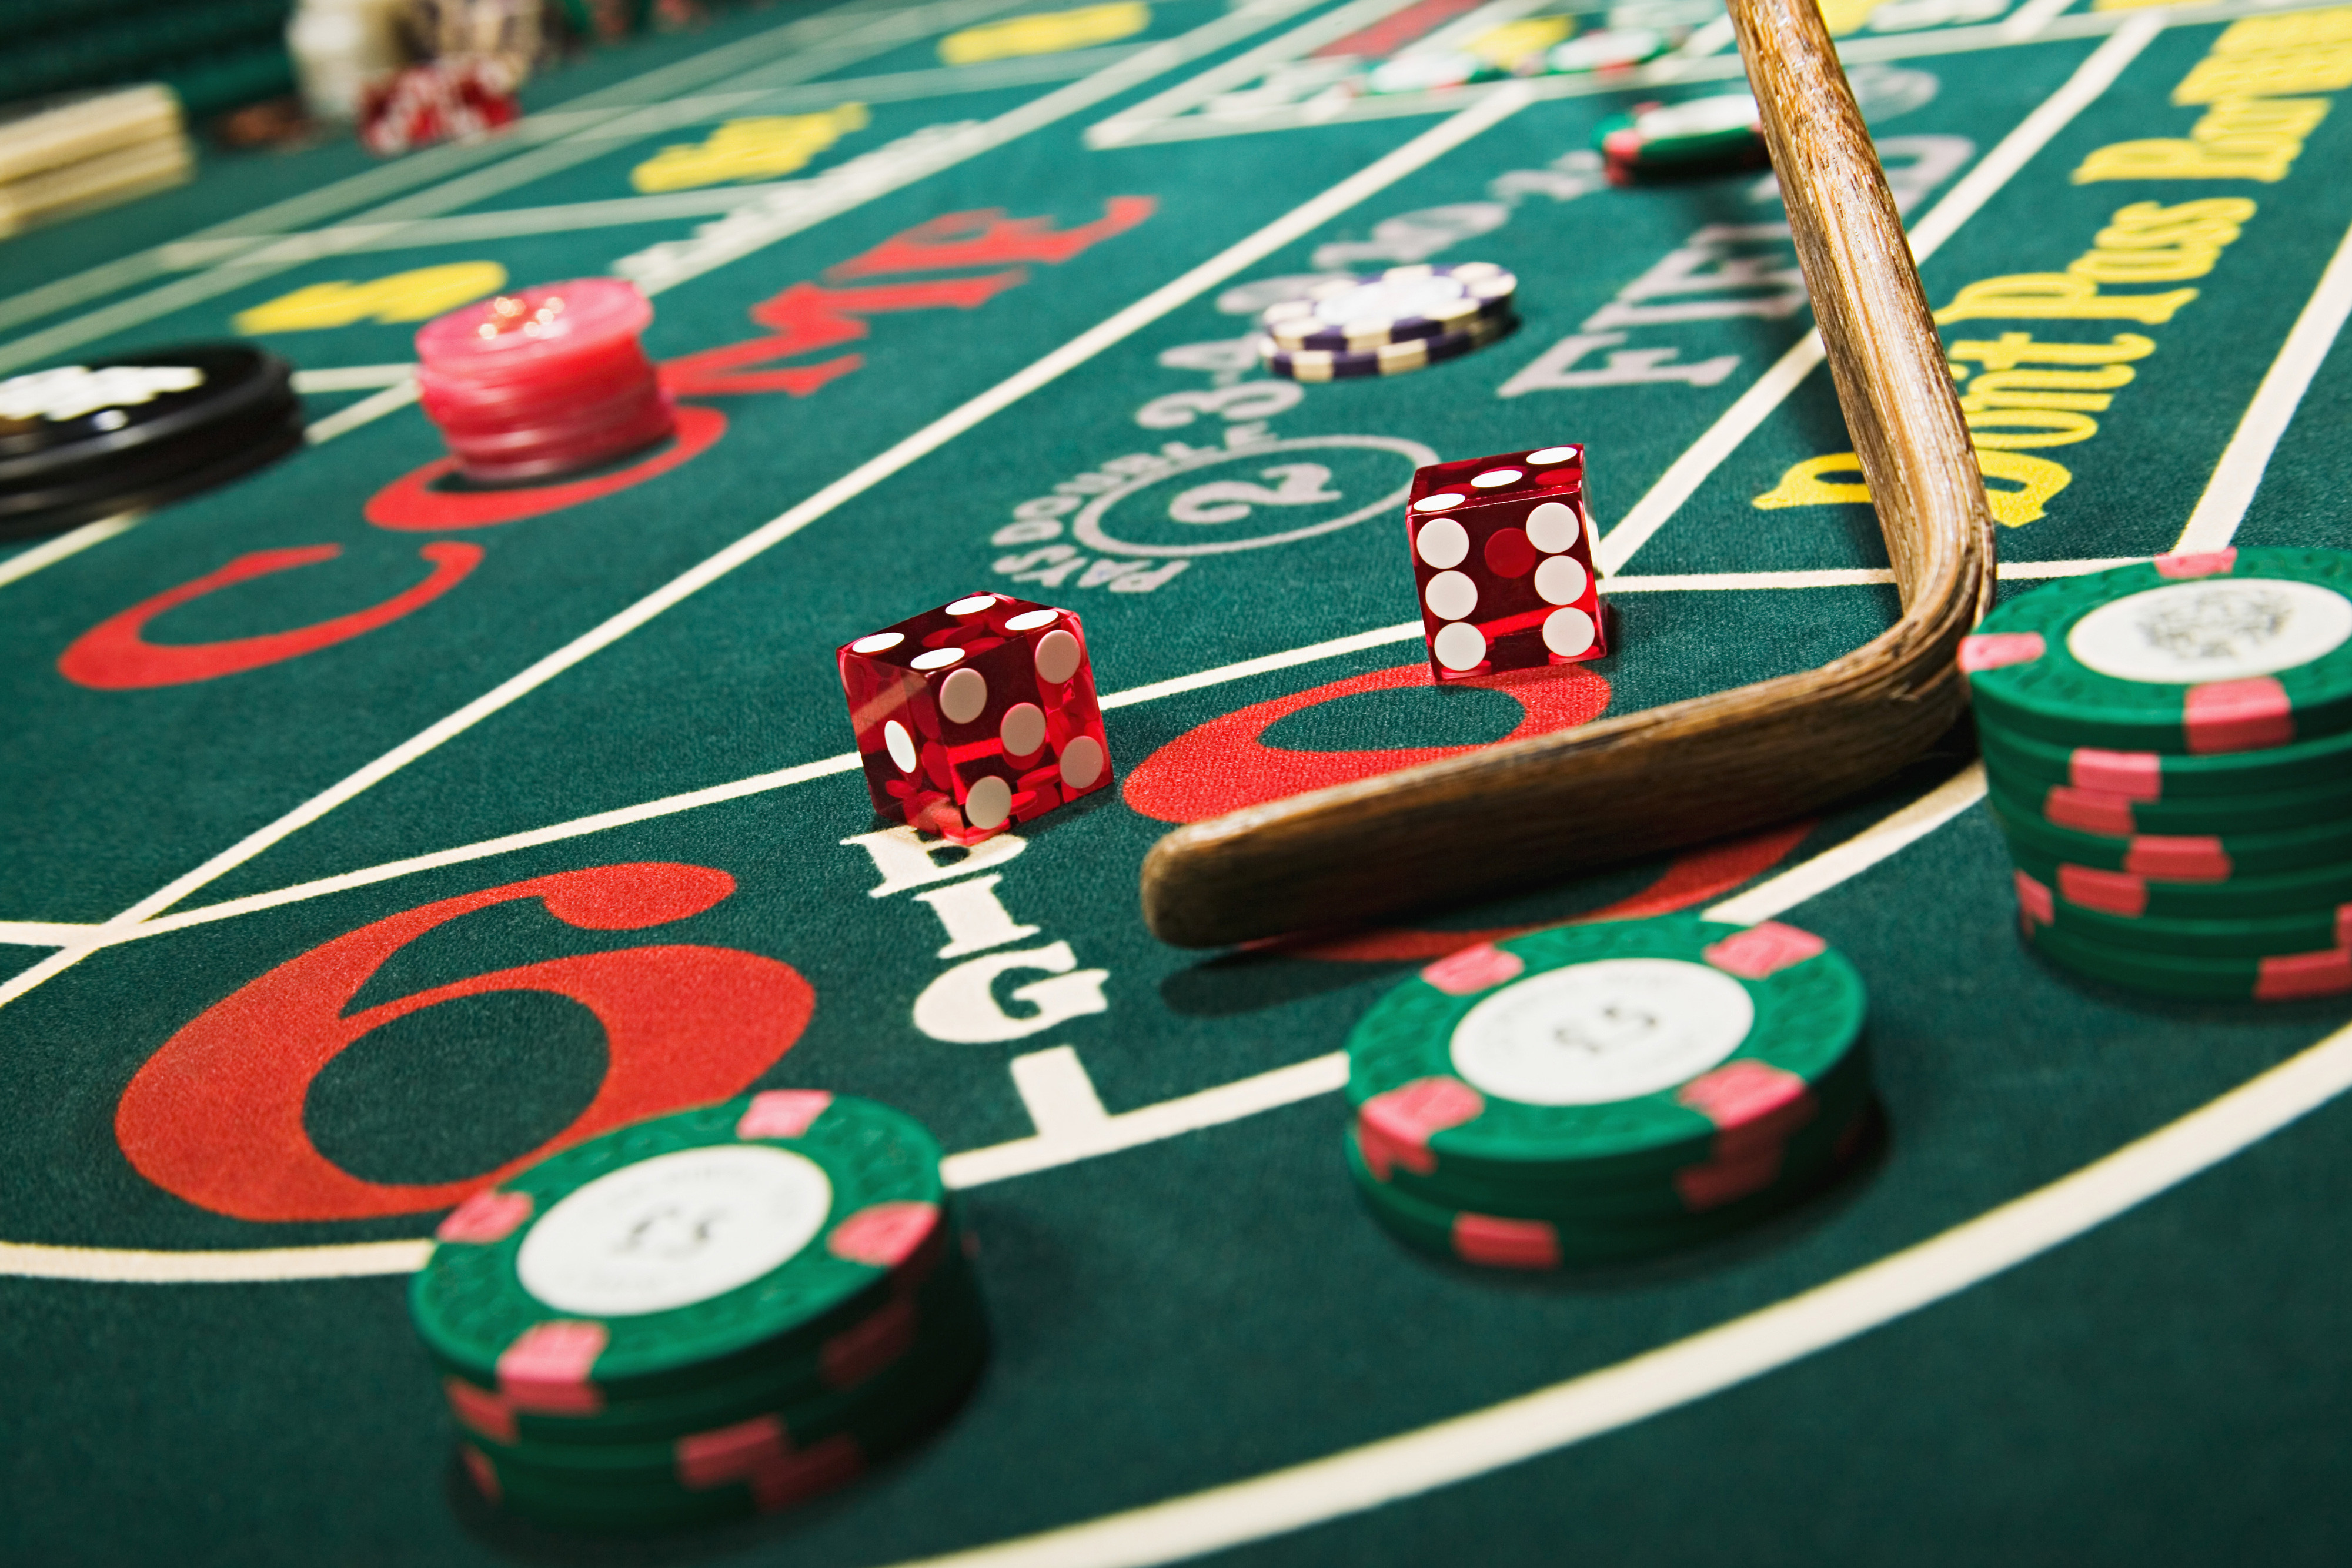 
Tips for Playing at the Casino for the First Time